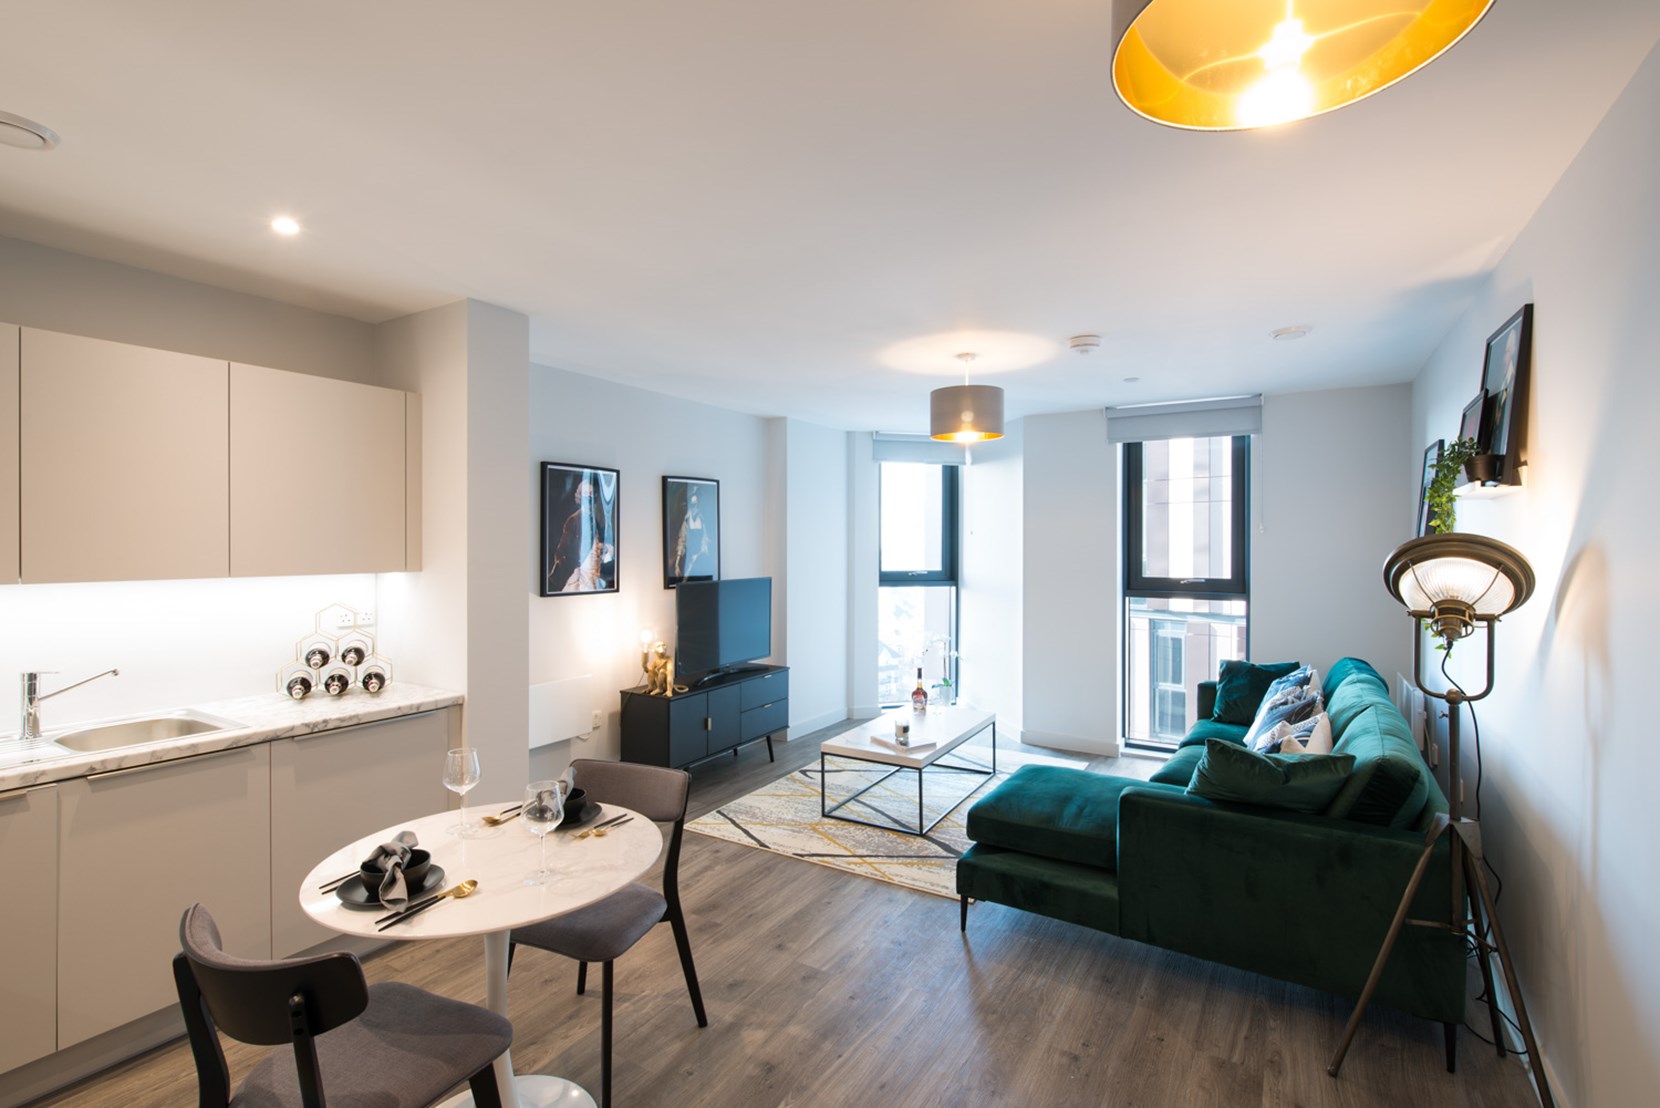 Apartments to Rent by JLL at Duet, Salford, M50, kitchen living dining area